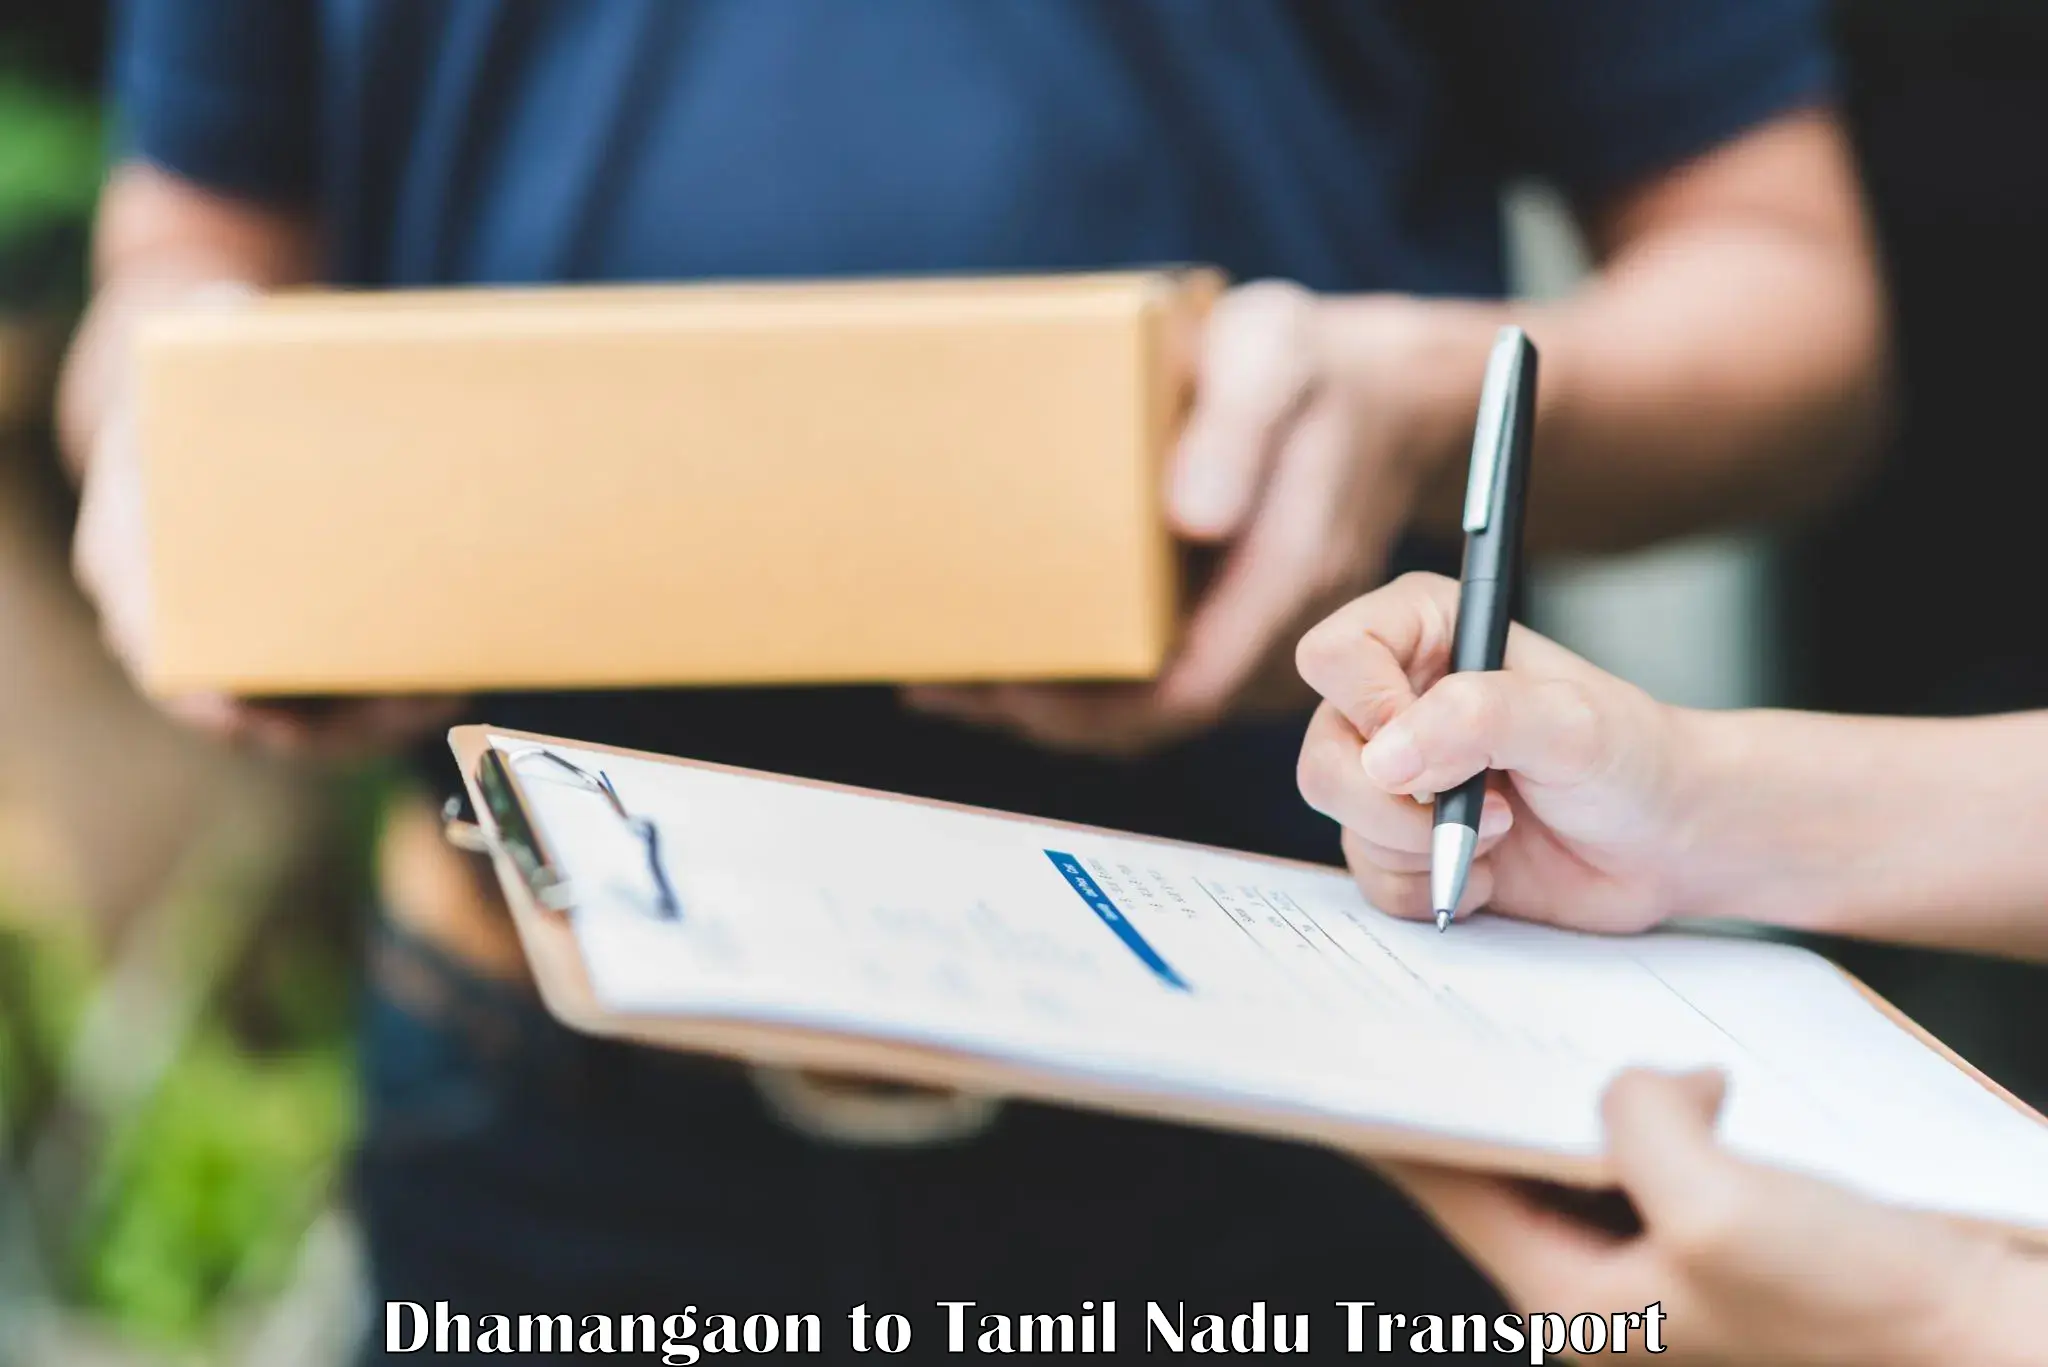 Online transport service Dhamangaon to Coonoor